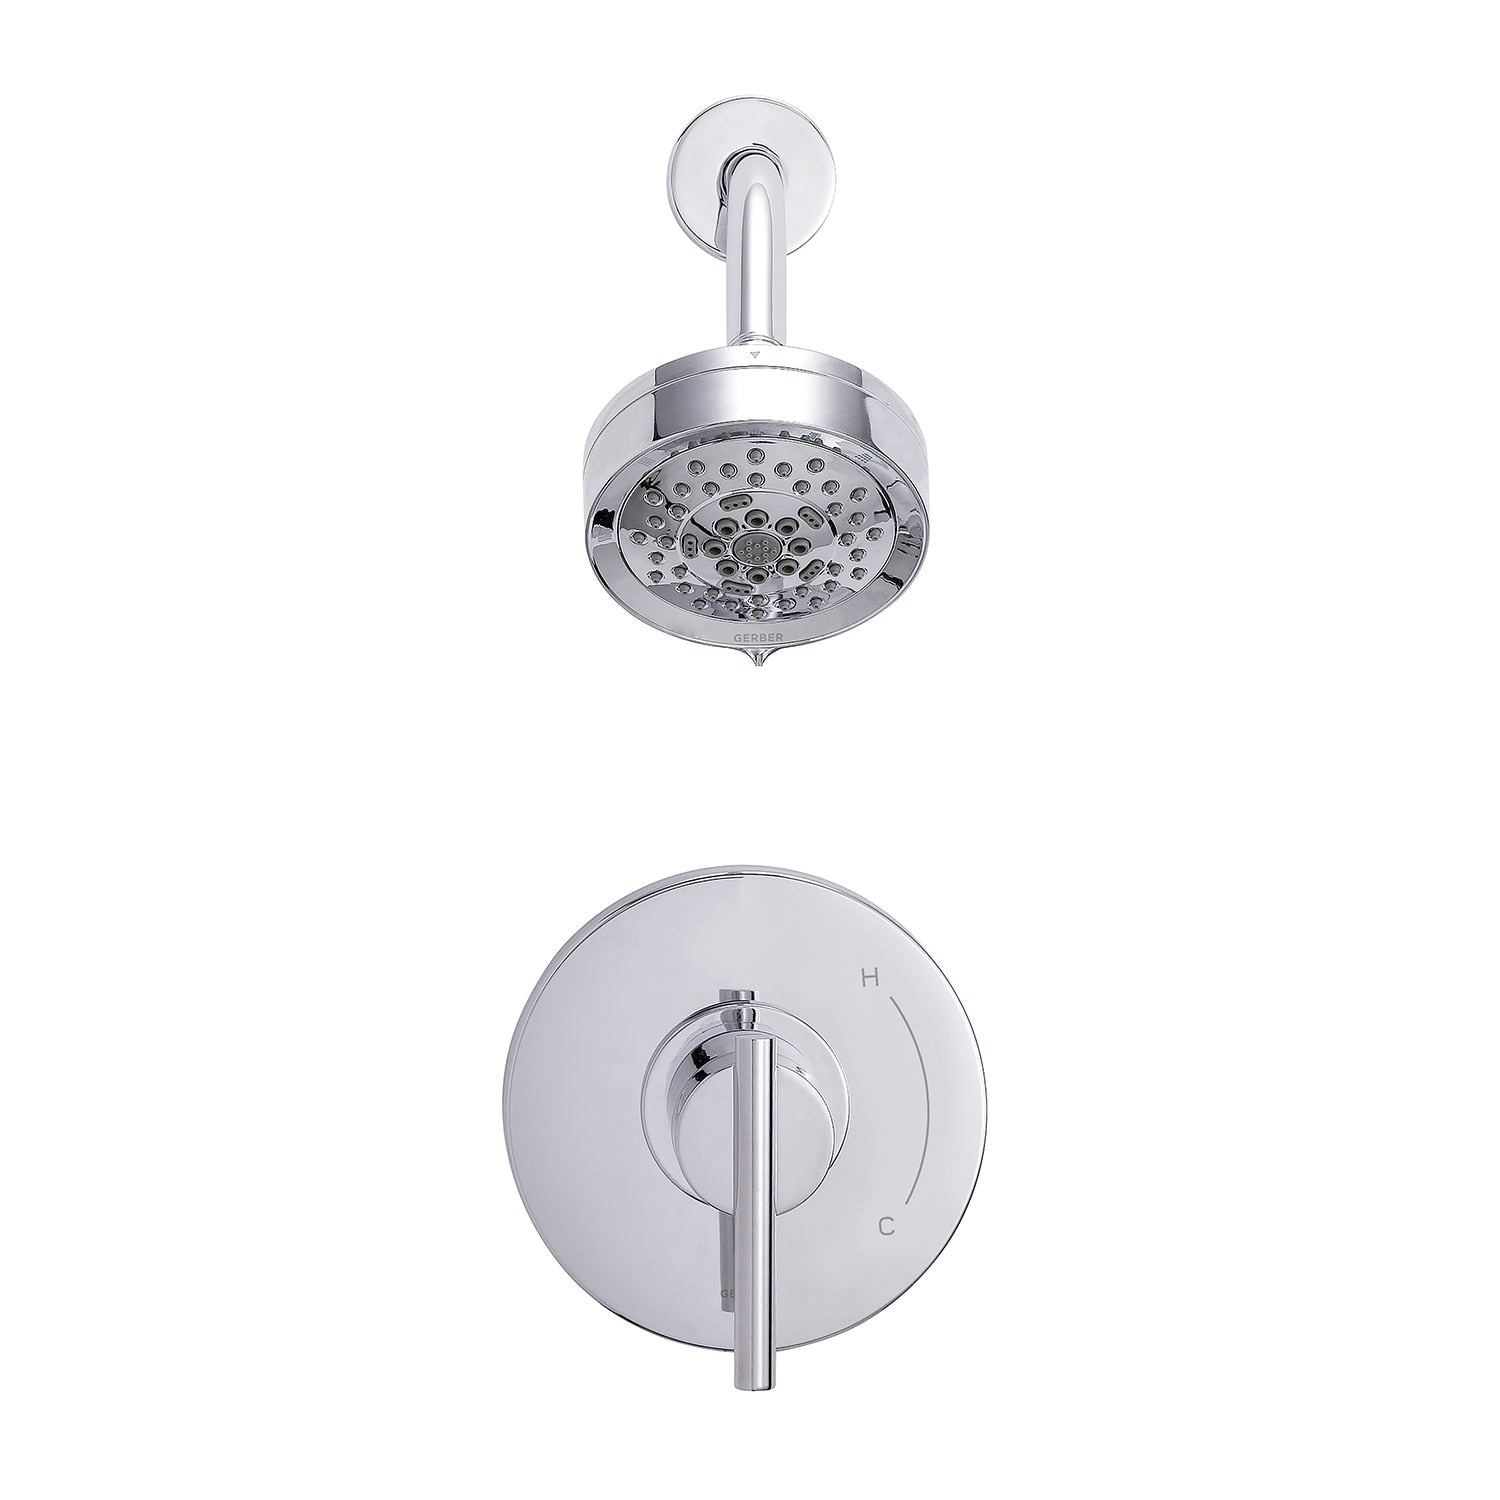 Danze by Gerber Parma 1H Shower Only Trim Kit and Treysta Cartridge w/ 5 Function Showerhead 1.75gpm